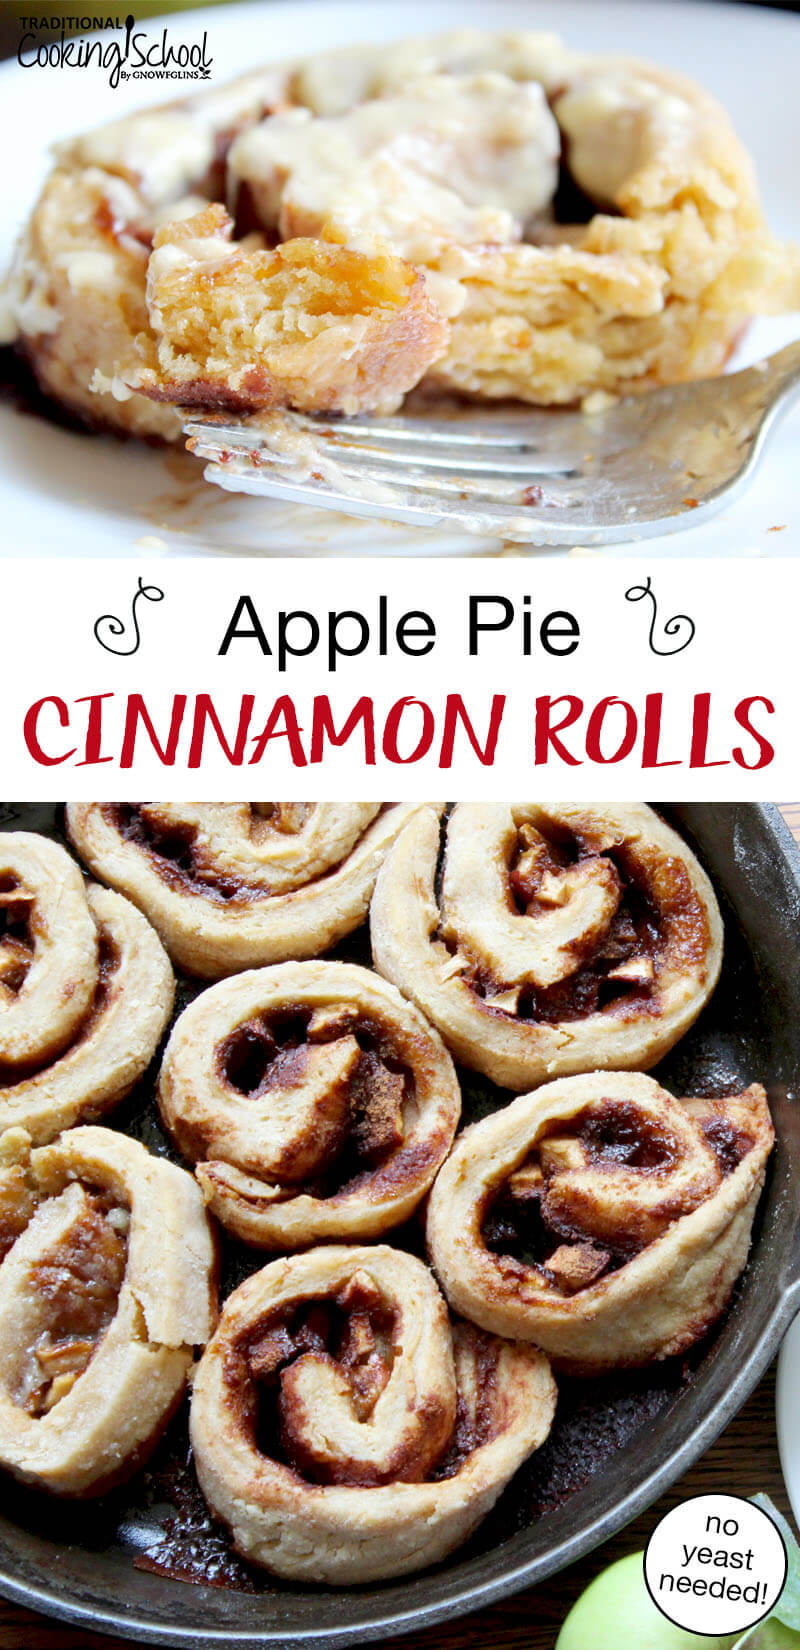 Photo collage of cinnamon rolls baking in a cast iron skillet, and on a plate with frosting. Text overlay says: "Apple Pie Cinnamon Rolls (no yeast needed!)"